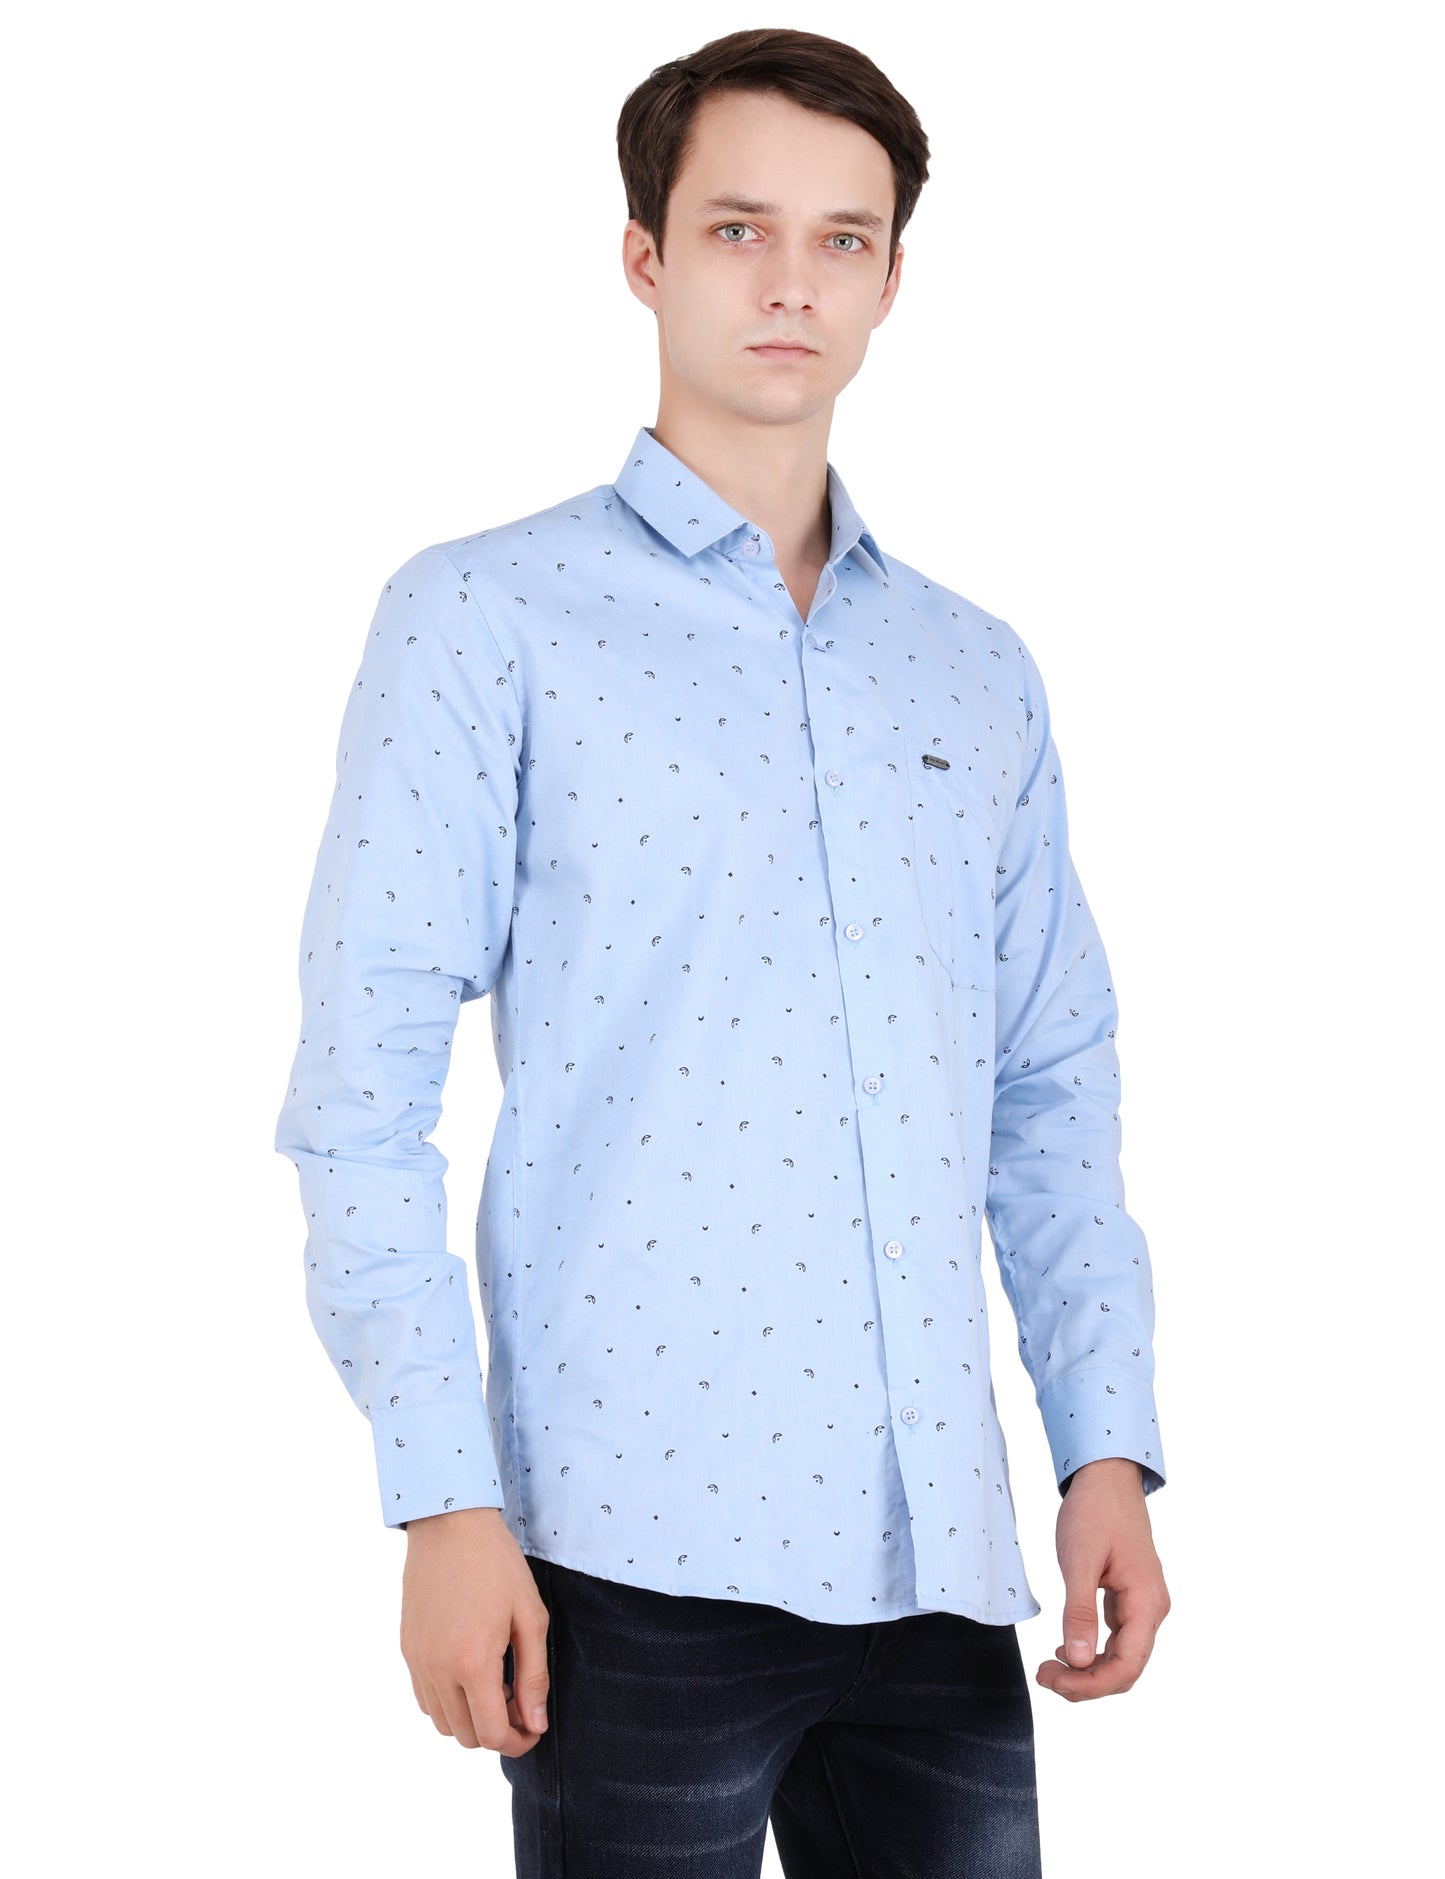 Chic Blue Shirt with Subtle Black Leaves - Elevate Your Wardrobe!